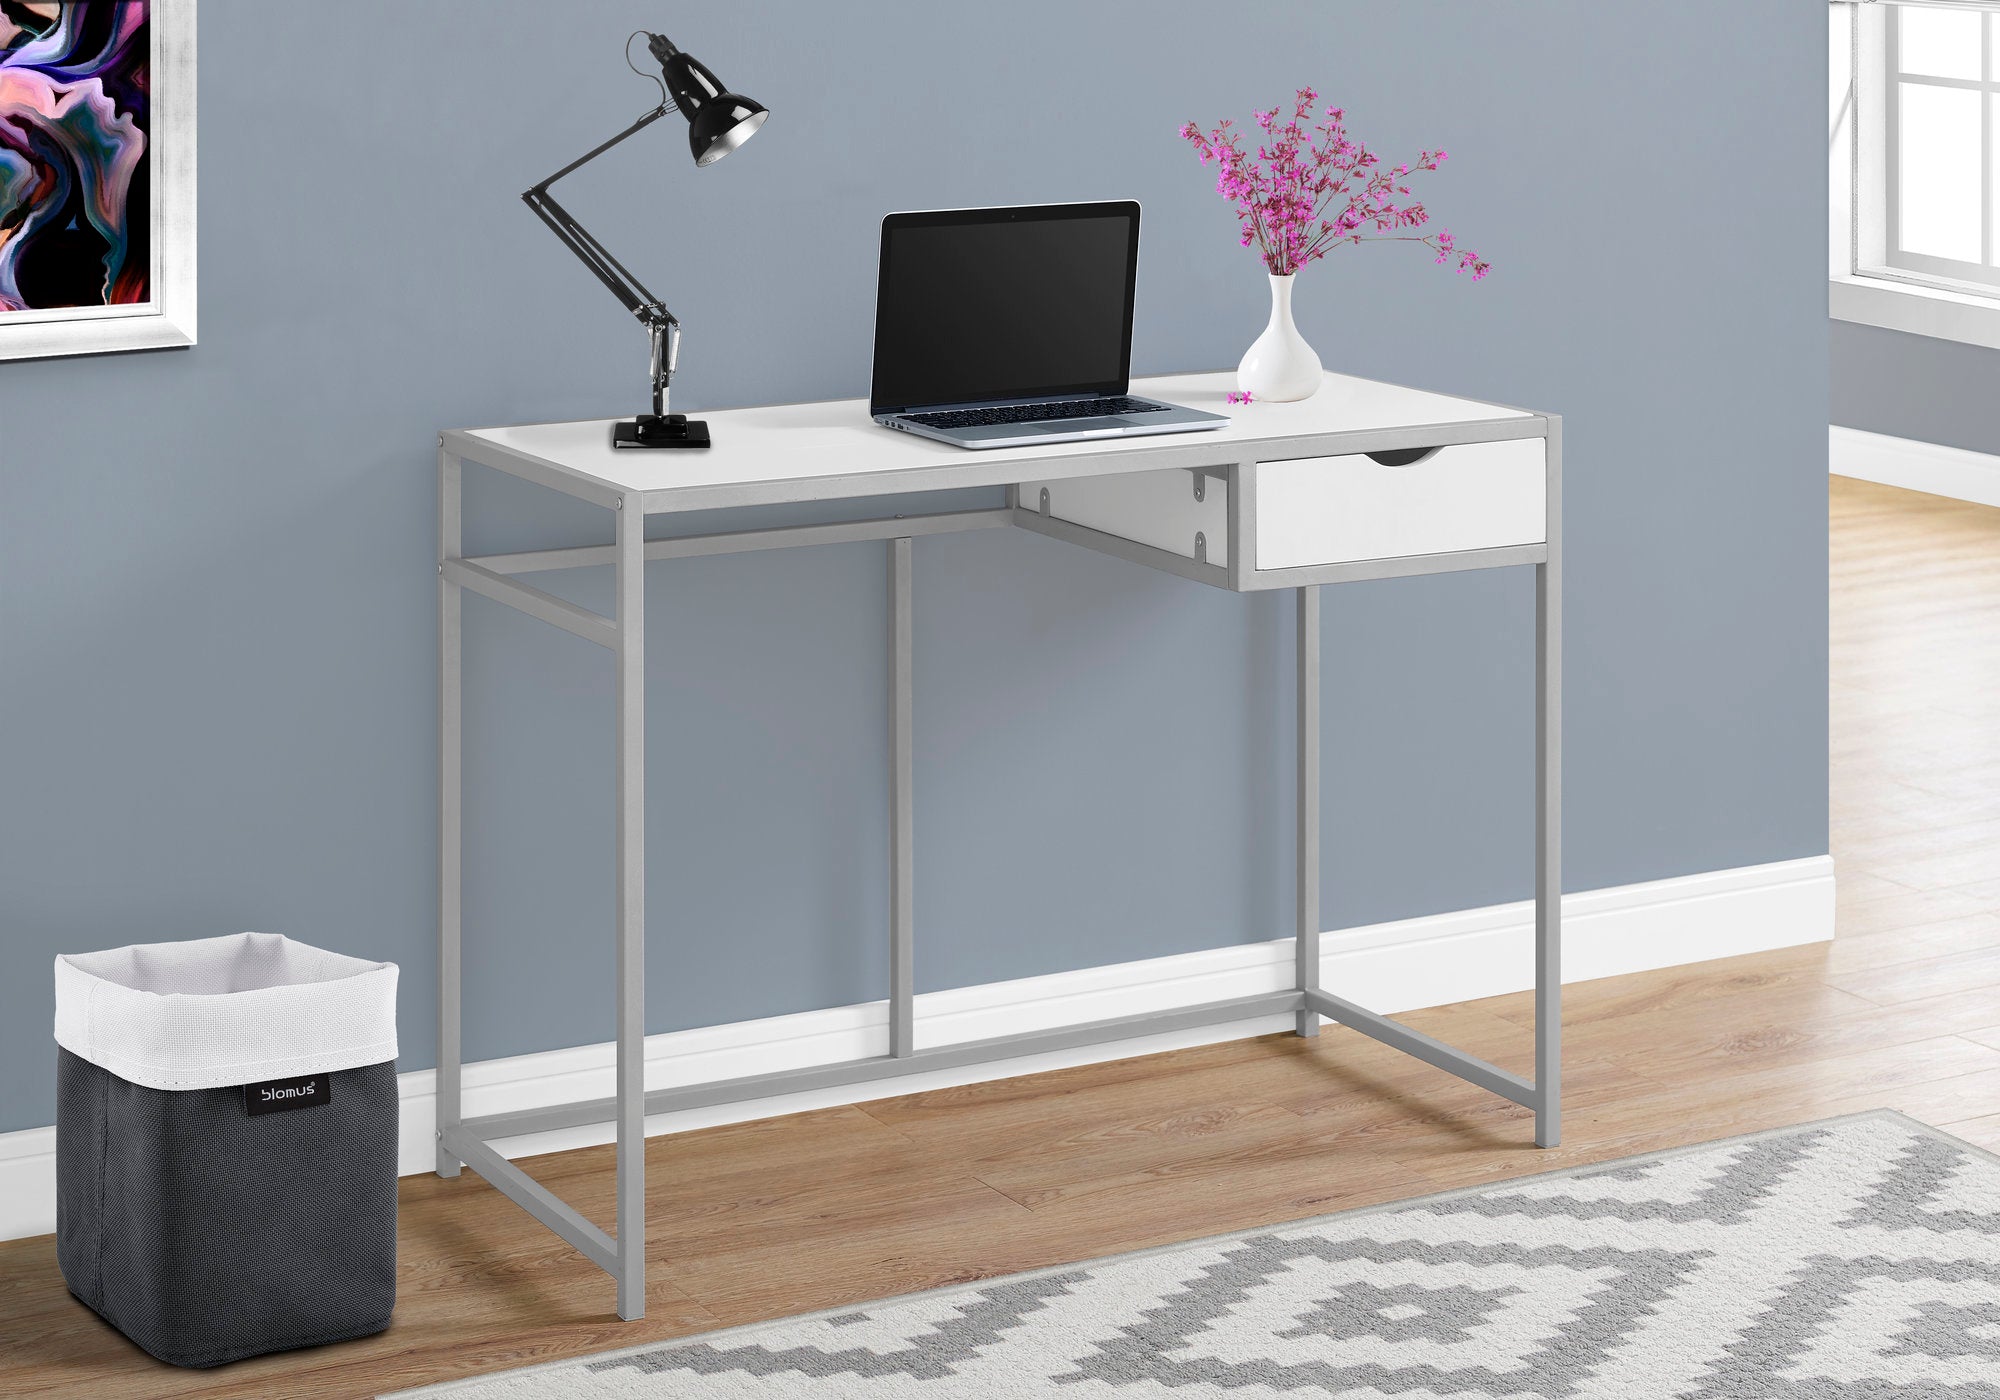 I 7222 - COMPUTER DESK - 42"L / WHITE / SILVER METAL BY MONARCH SPECIALTIES INC